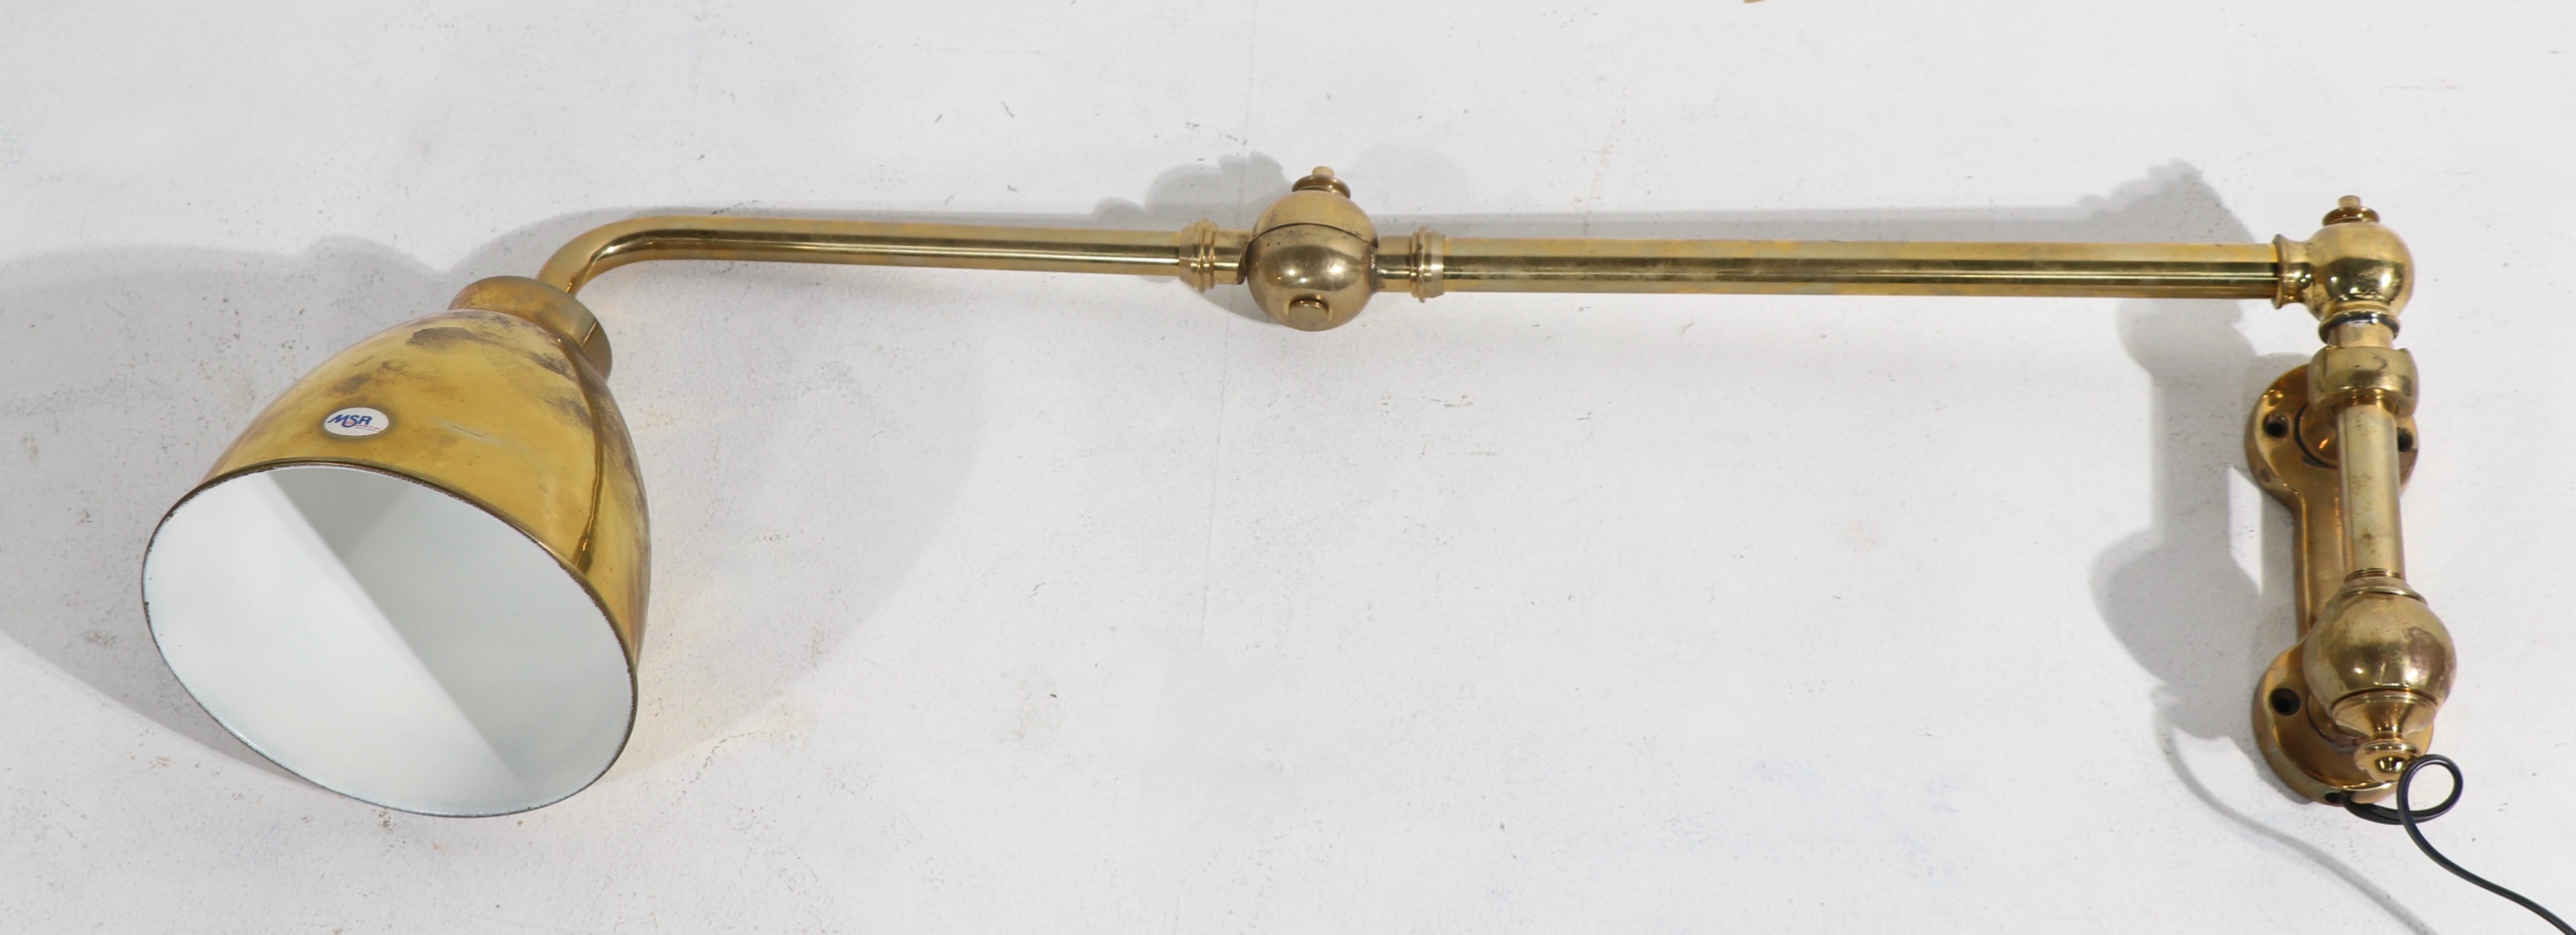 Nice pair of flex, or swing, arm sconces in solid brass. Each sconce features the original wall mount backplate, two tubular arms connected with a knuckle joint, and a bell shaped hood shade. Both are in working condition, and accept standard size